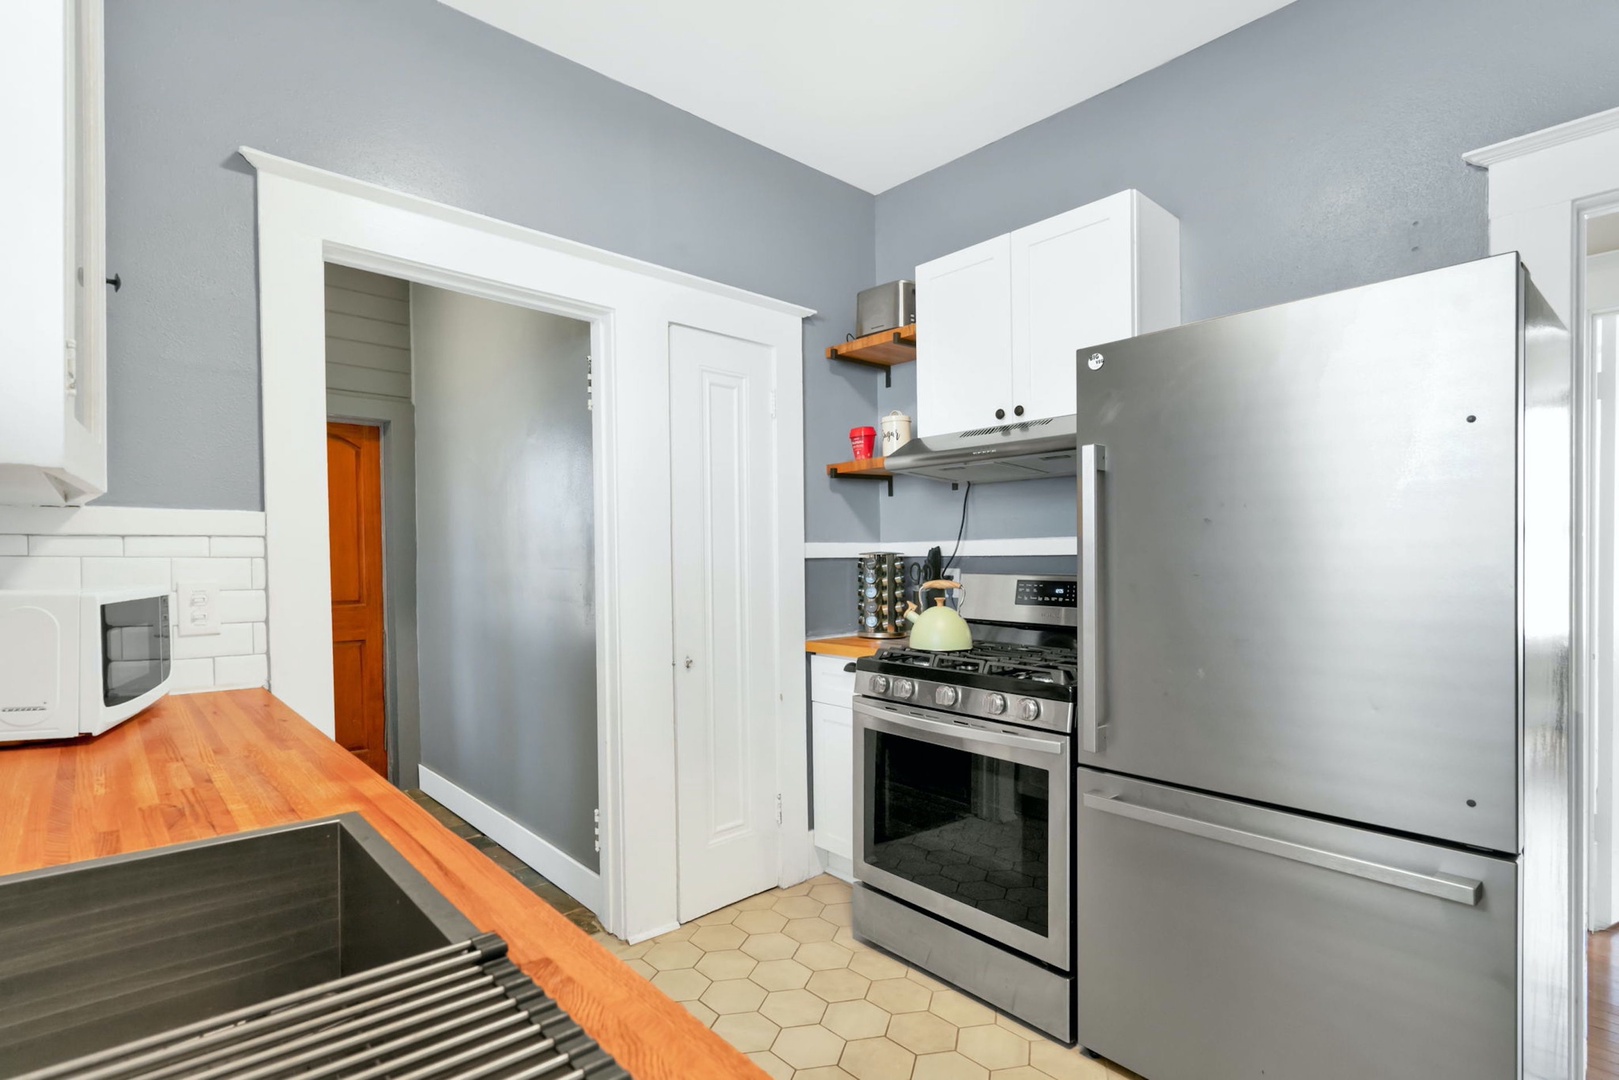 The breezy kitchen offers ample space & all the comforts of home